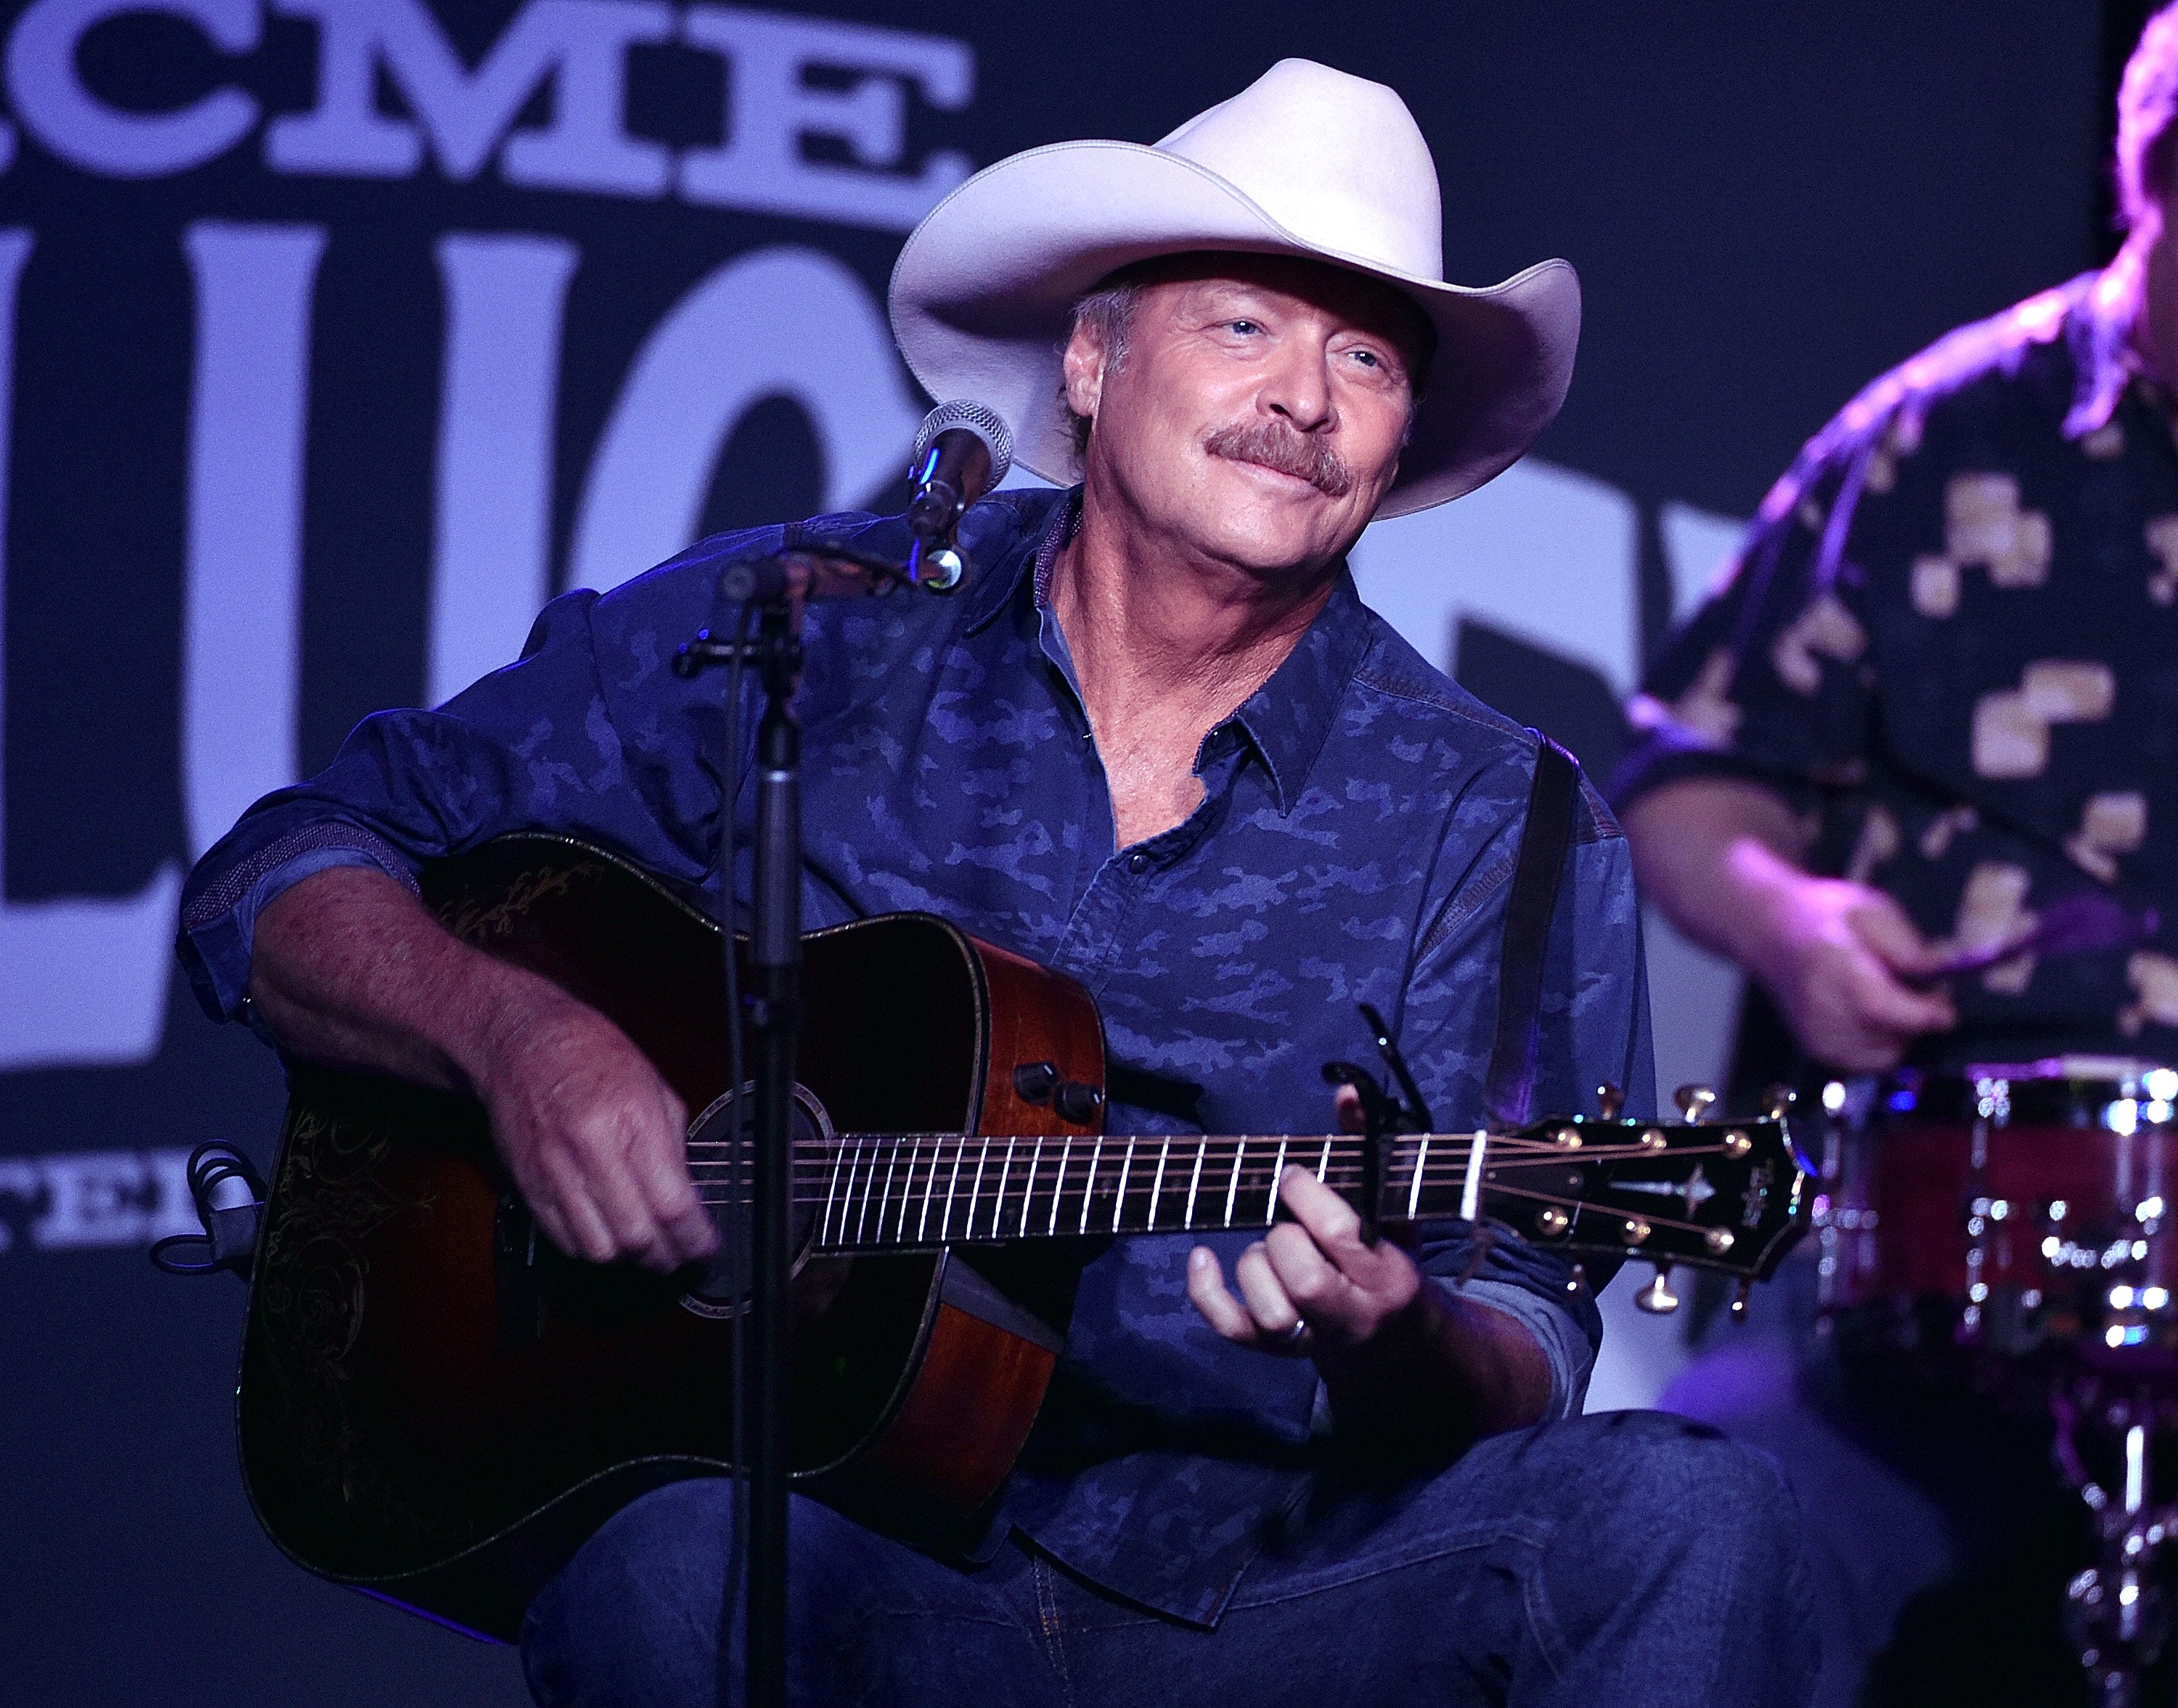 Alan Jackson performs live at Acme Feed & Seed on June 7, 2016 in Nashville, Tennessee ┃Source: Getty Images